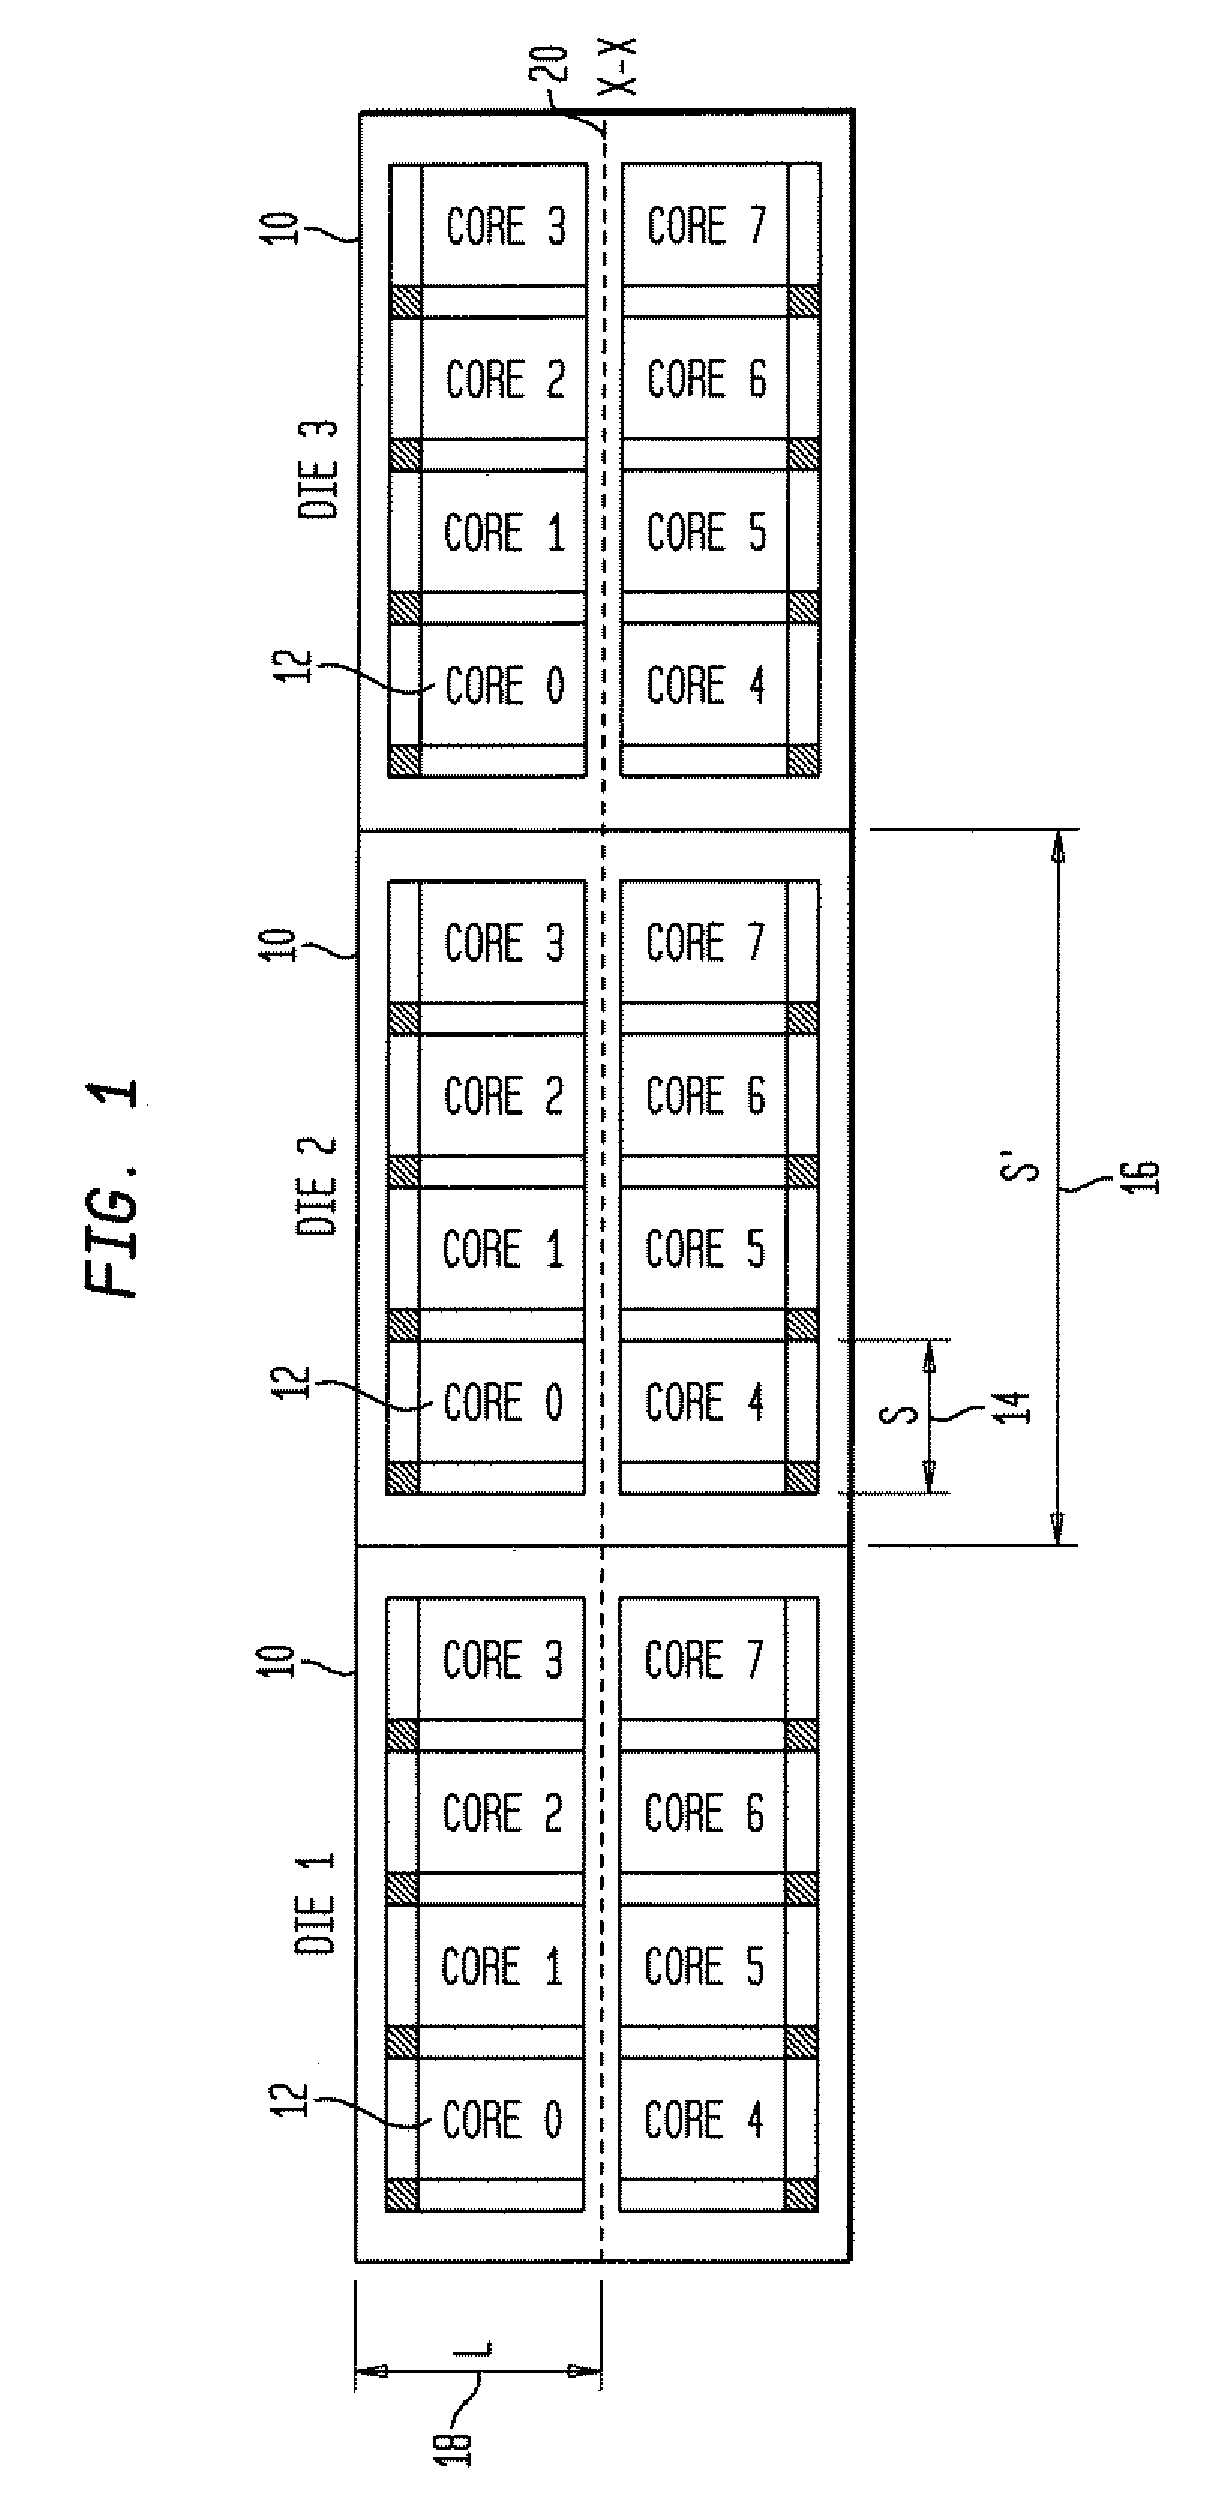 Computer-implemented methods, carrier media, and systems for detecting defects on a wafer based on multi-core architecture